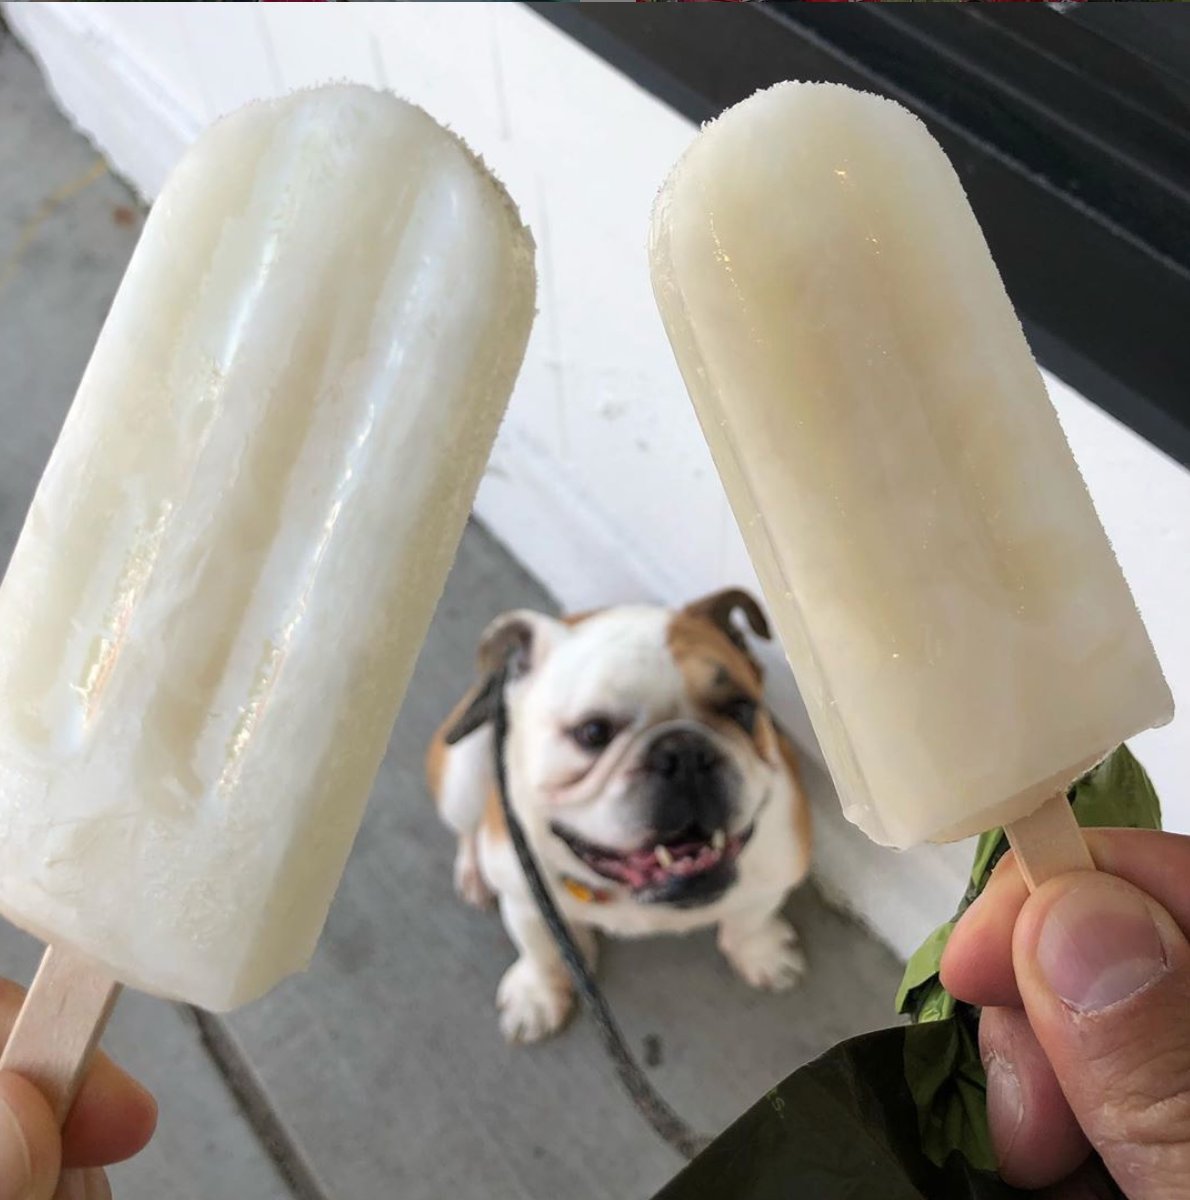 Care to share with a friend? 💛 Our all-natural paletas are locally made with love in North Vancouver using traditional recipes and organic ingredients. 
Cute 📷 @piezoelec #riconlalo #paletas #yvr #frozenfruitbar #popsicle #madeincanada #mainstreetcarfreeday #bulldog